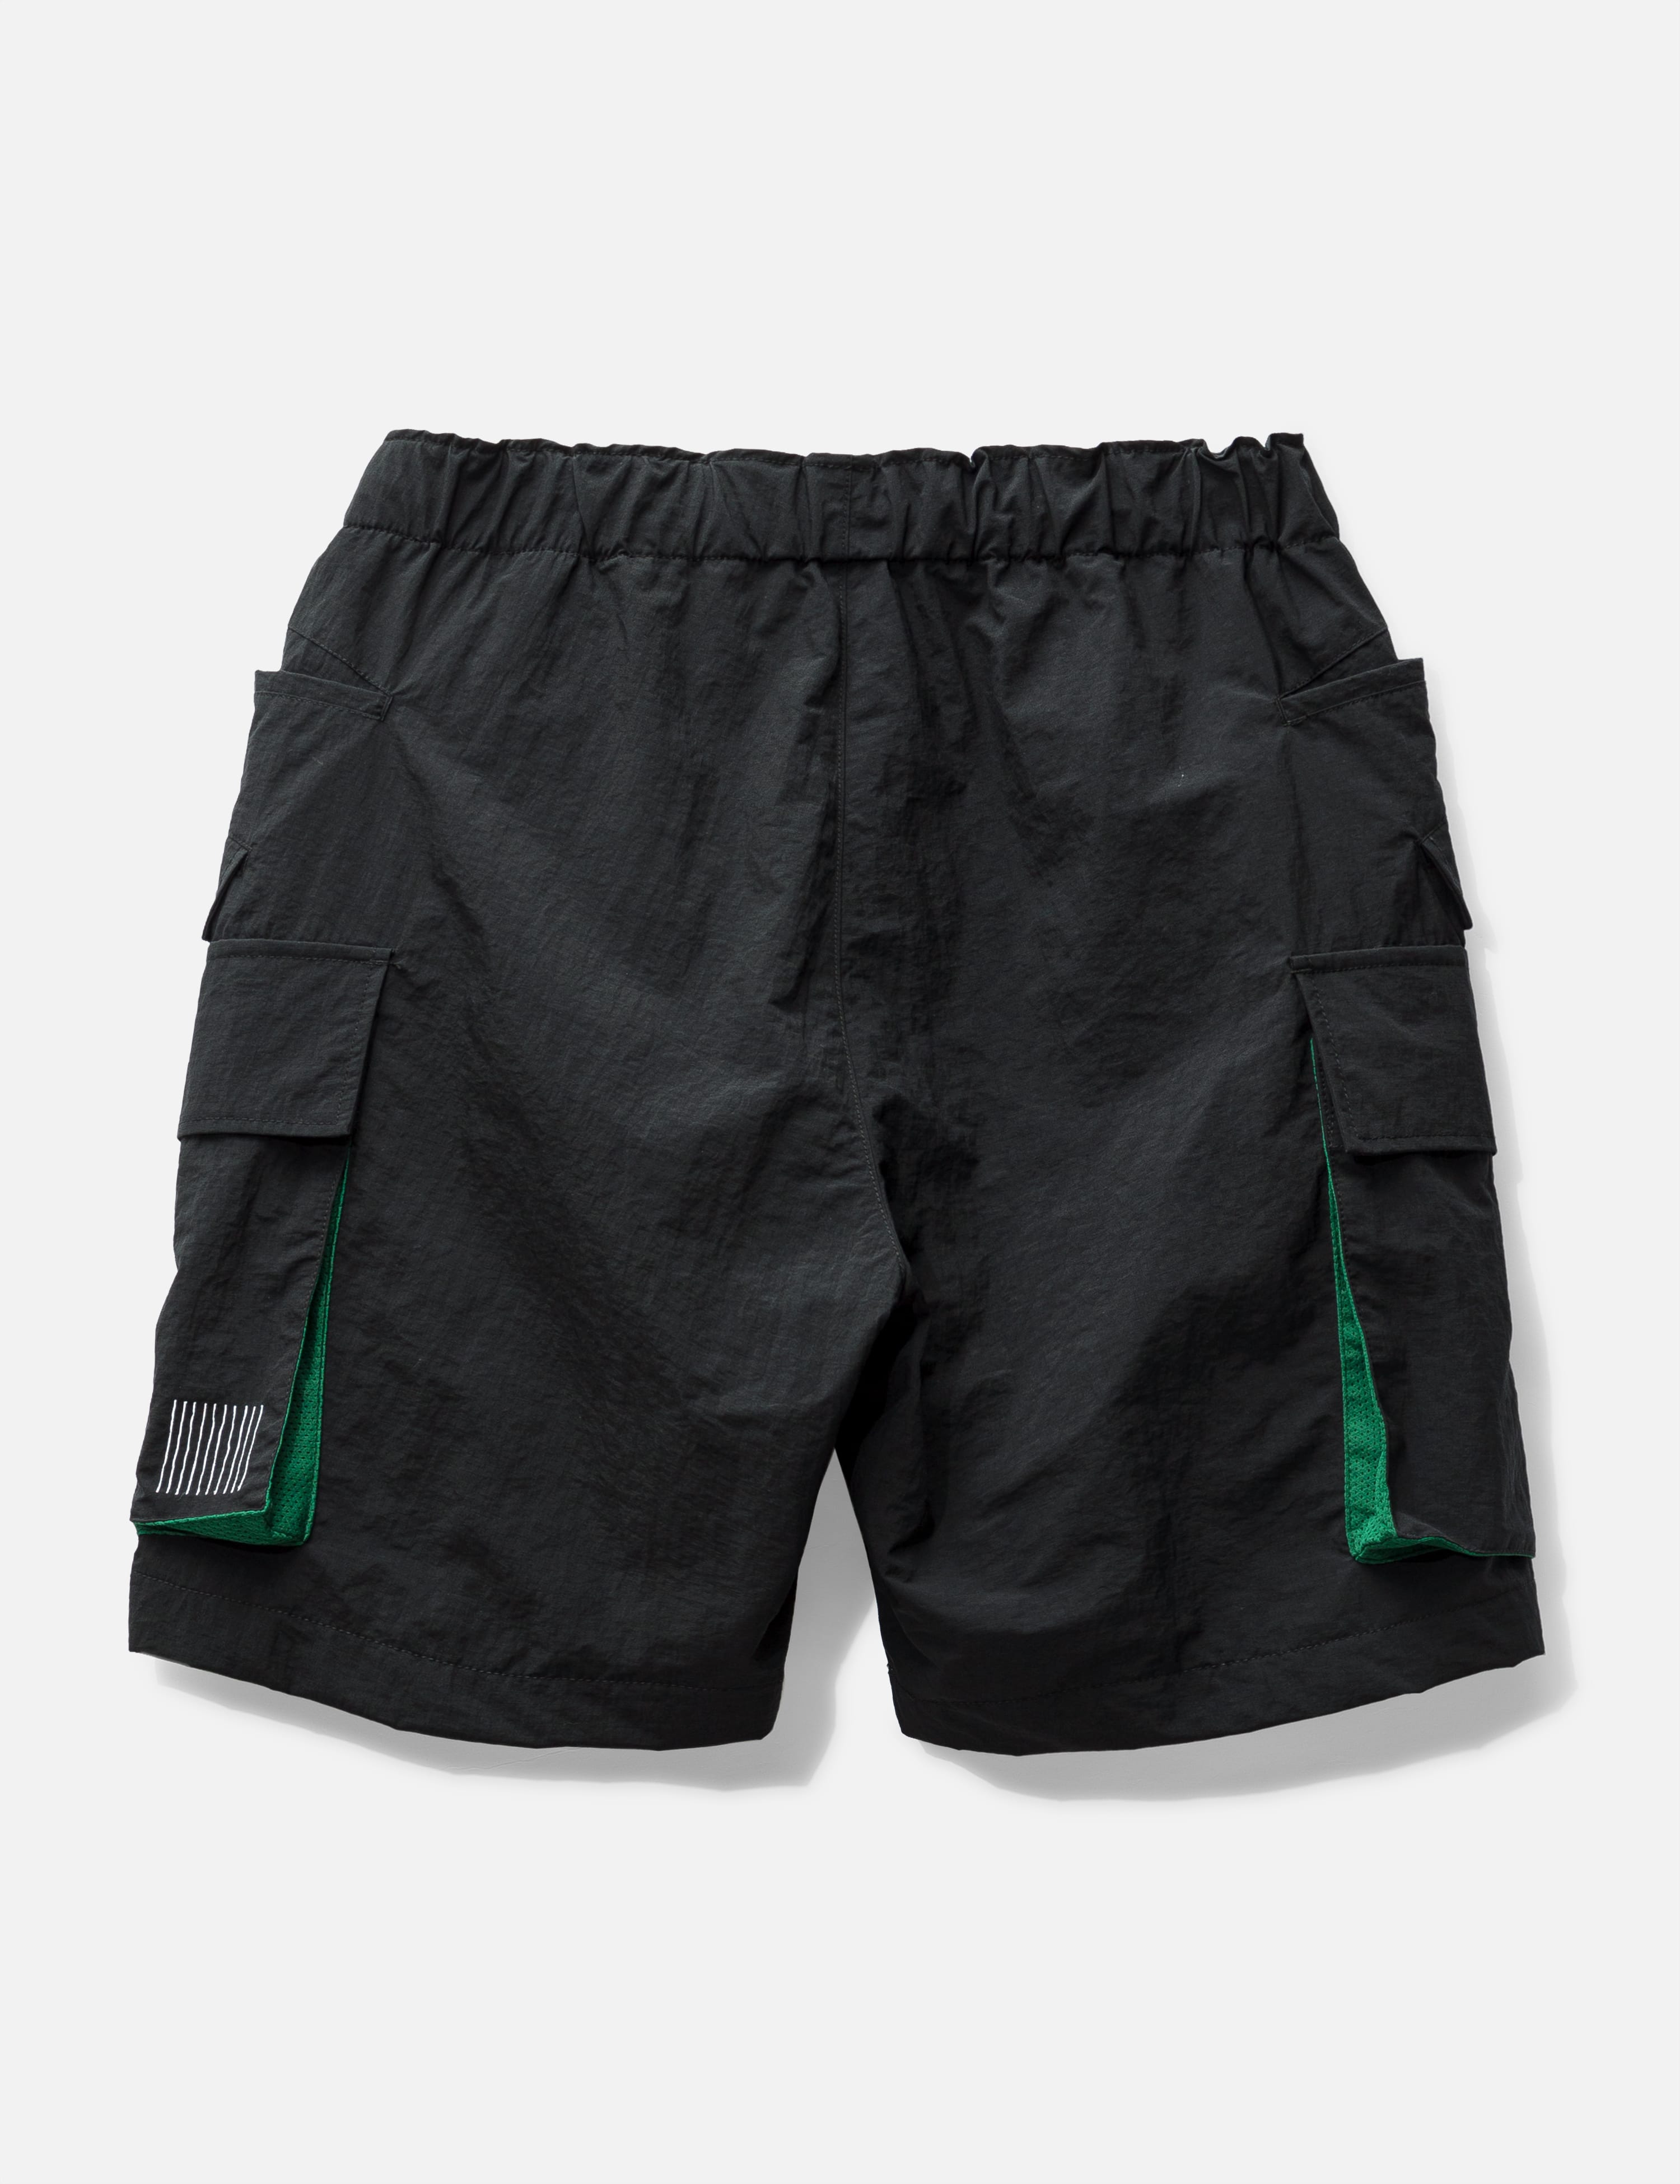 Stripes For Creative - 6 Pocket Shorts | HBX - Globally Curated